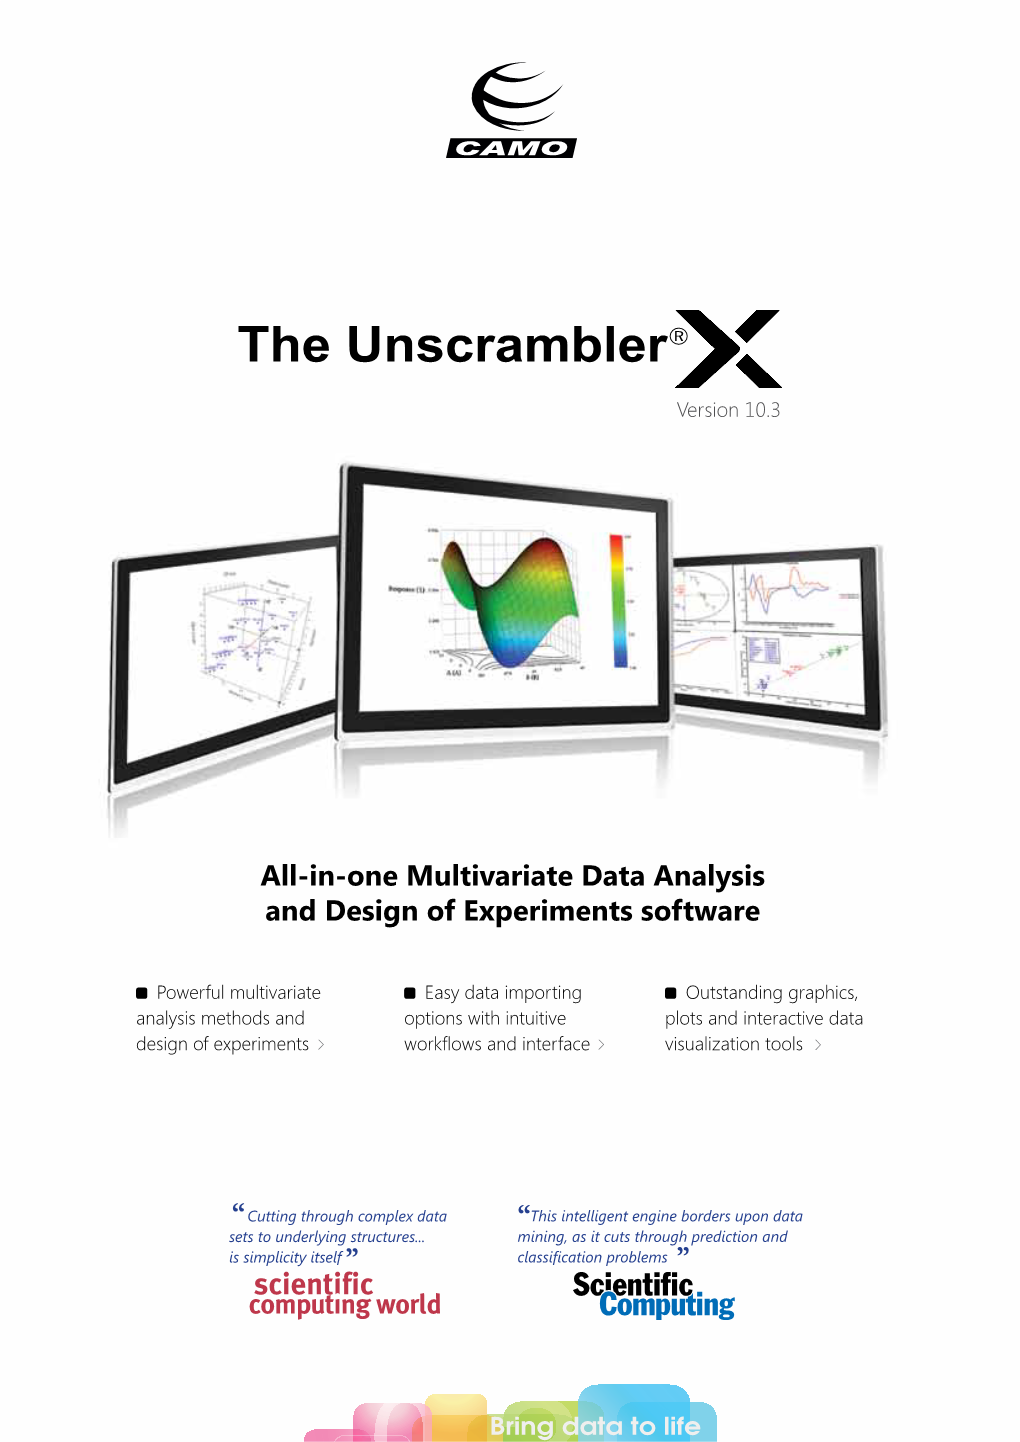 All-In-One Multivariate Data Analysis and Design of Experiments Software